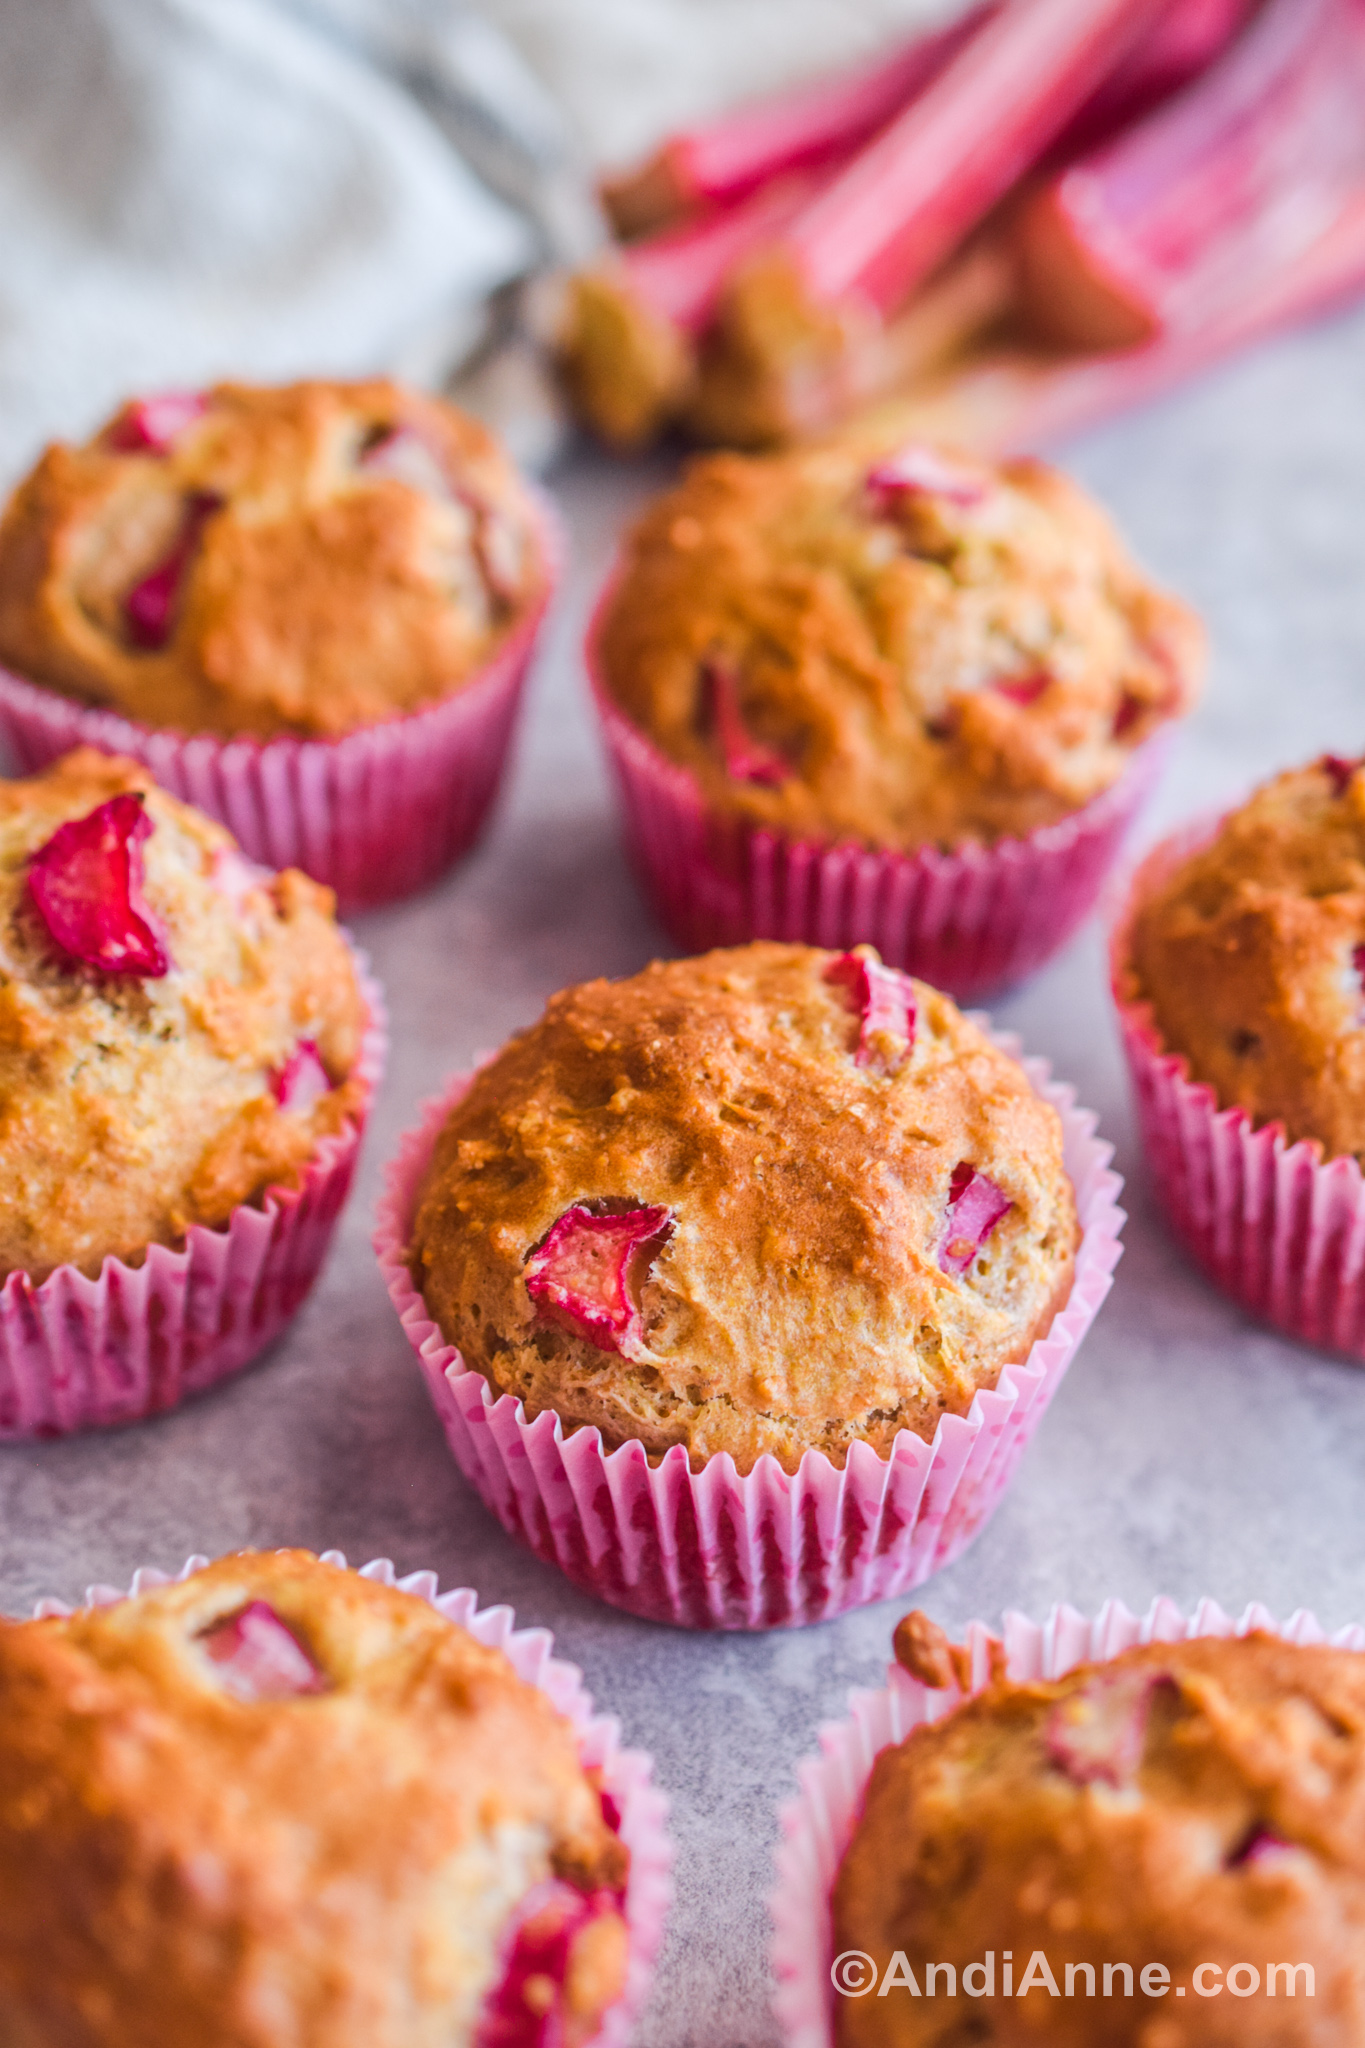 Rhubarb muffins close up with sticks of rhubarb in the background.